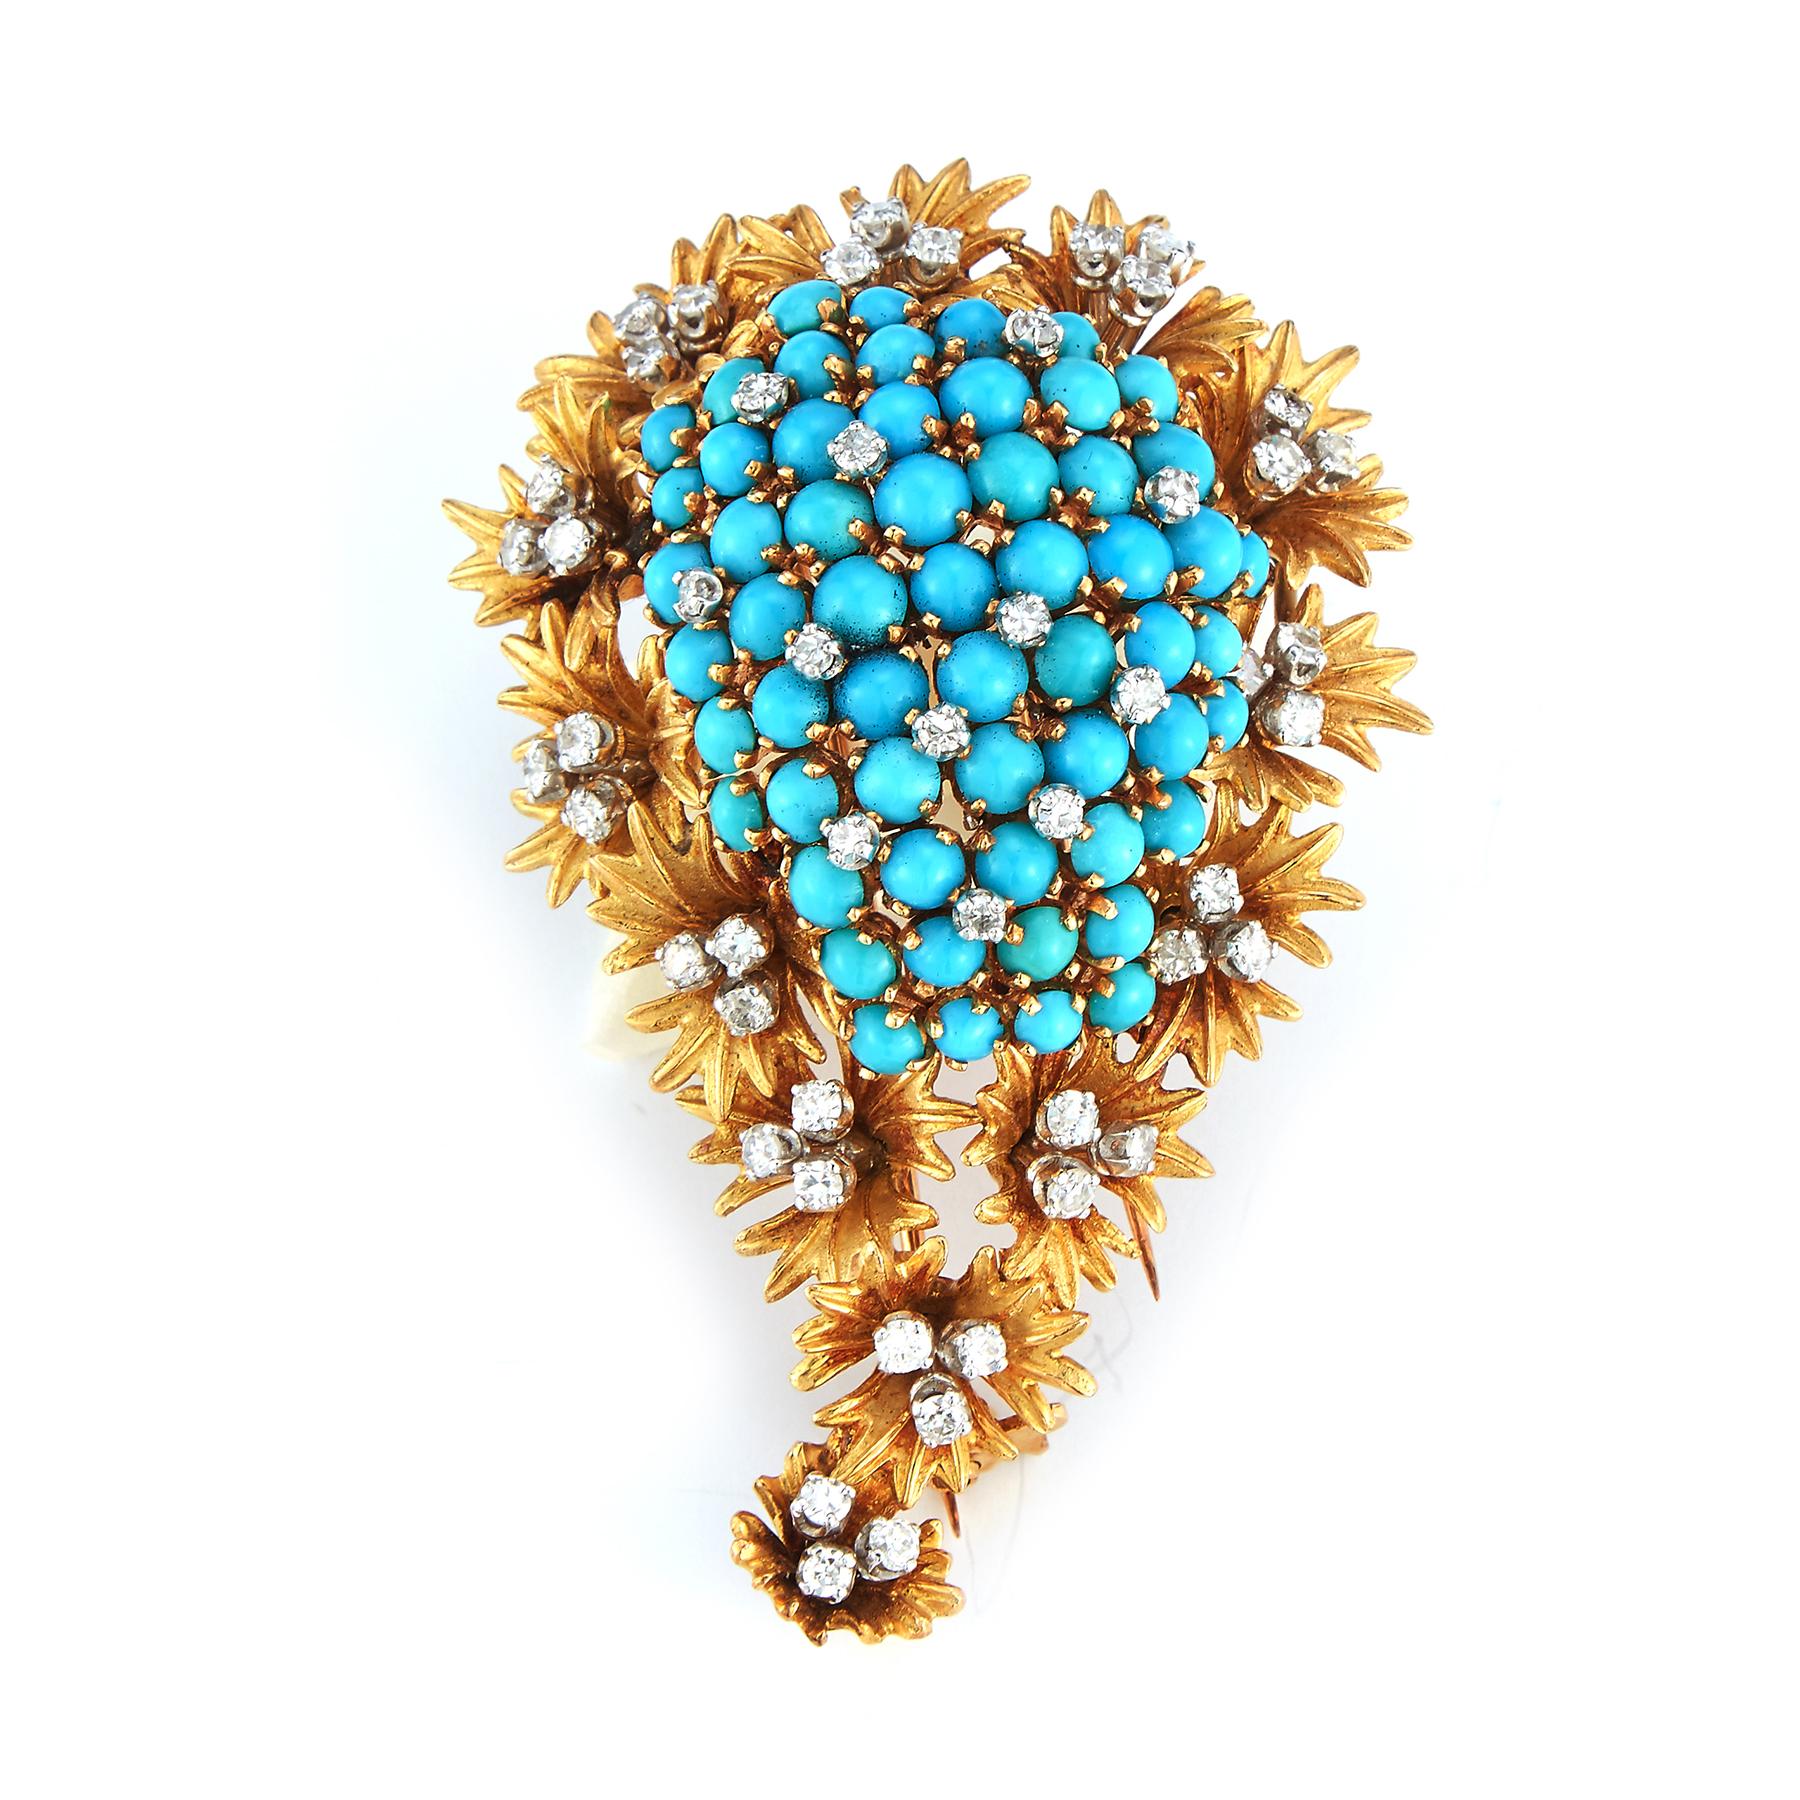 Turquoise & Diamond Paisley Brooch, a cluster of cabochon turquoise with round cut surrounded by carved yellow gold flowers. 

Measurements: 2.5